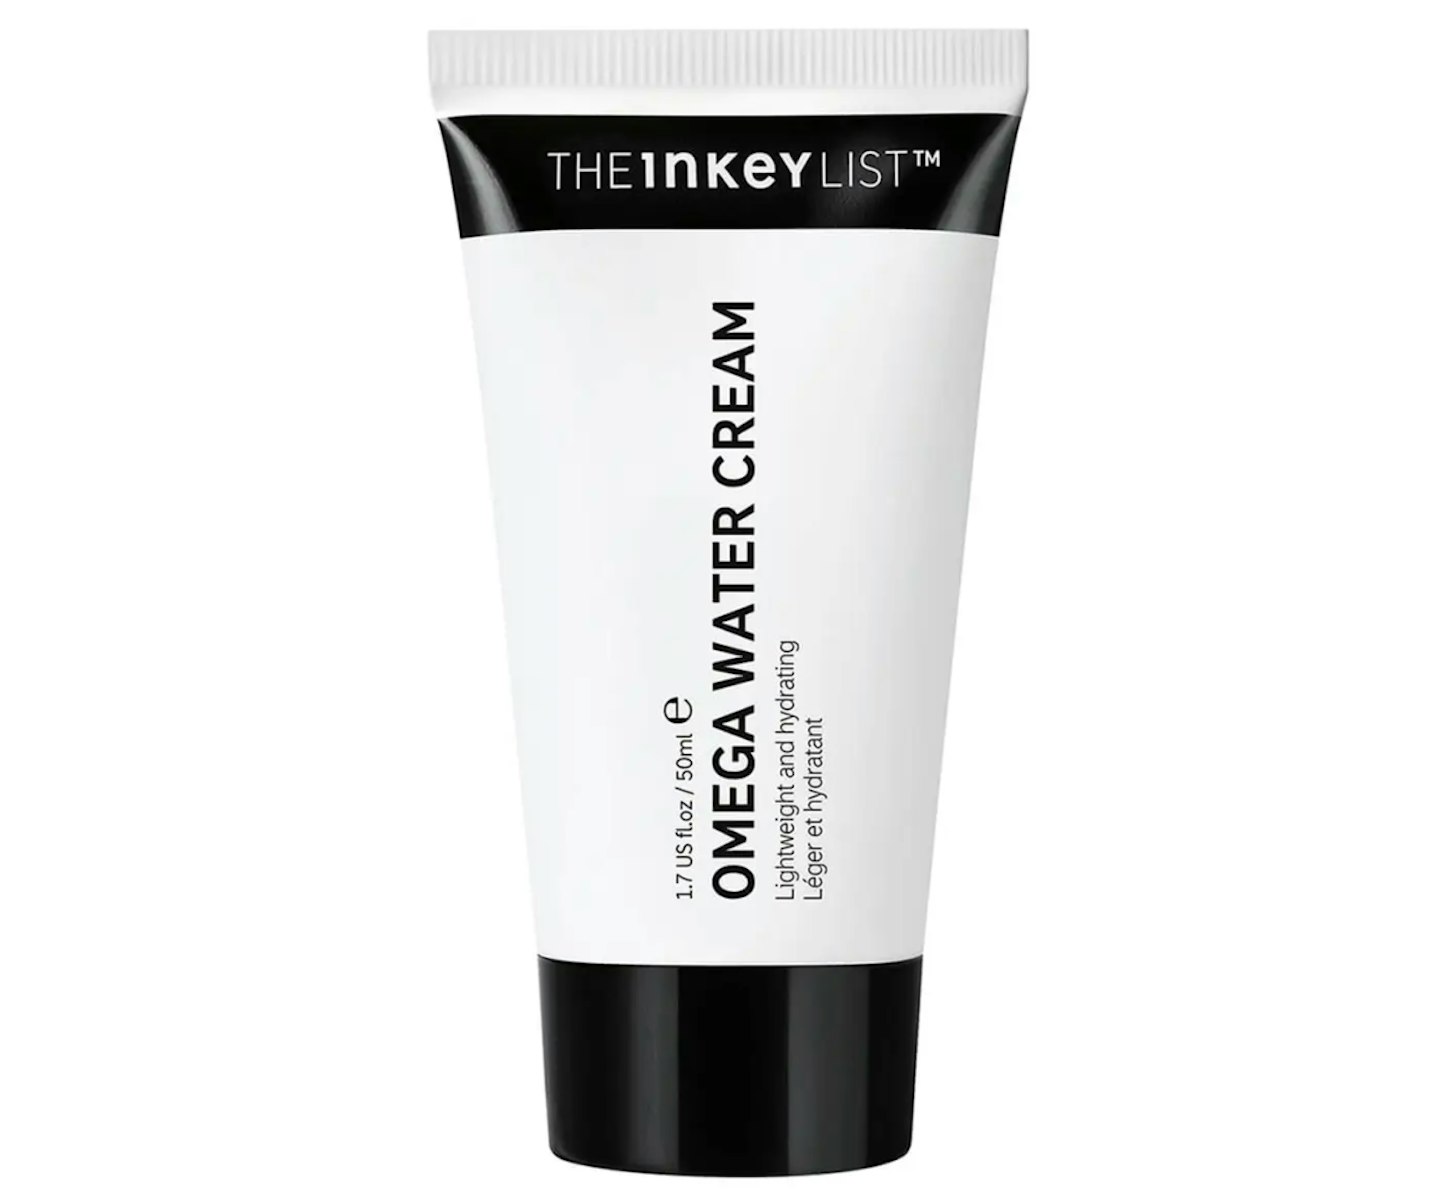 A picture of the The Inkey List Omega Water Cream Moisturiser